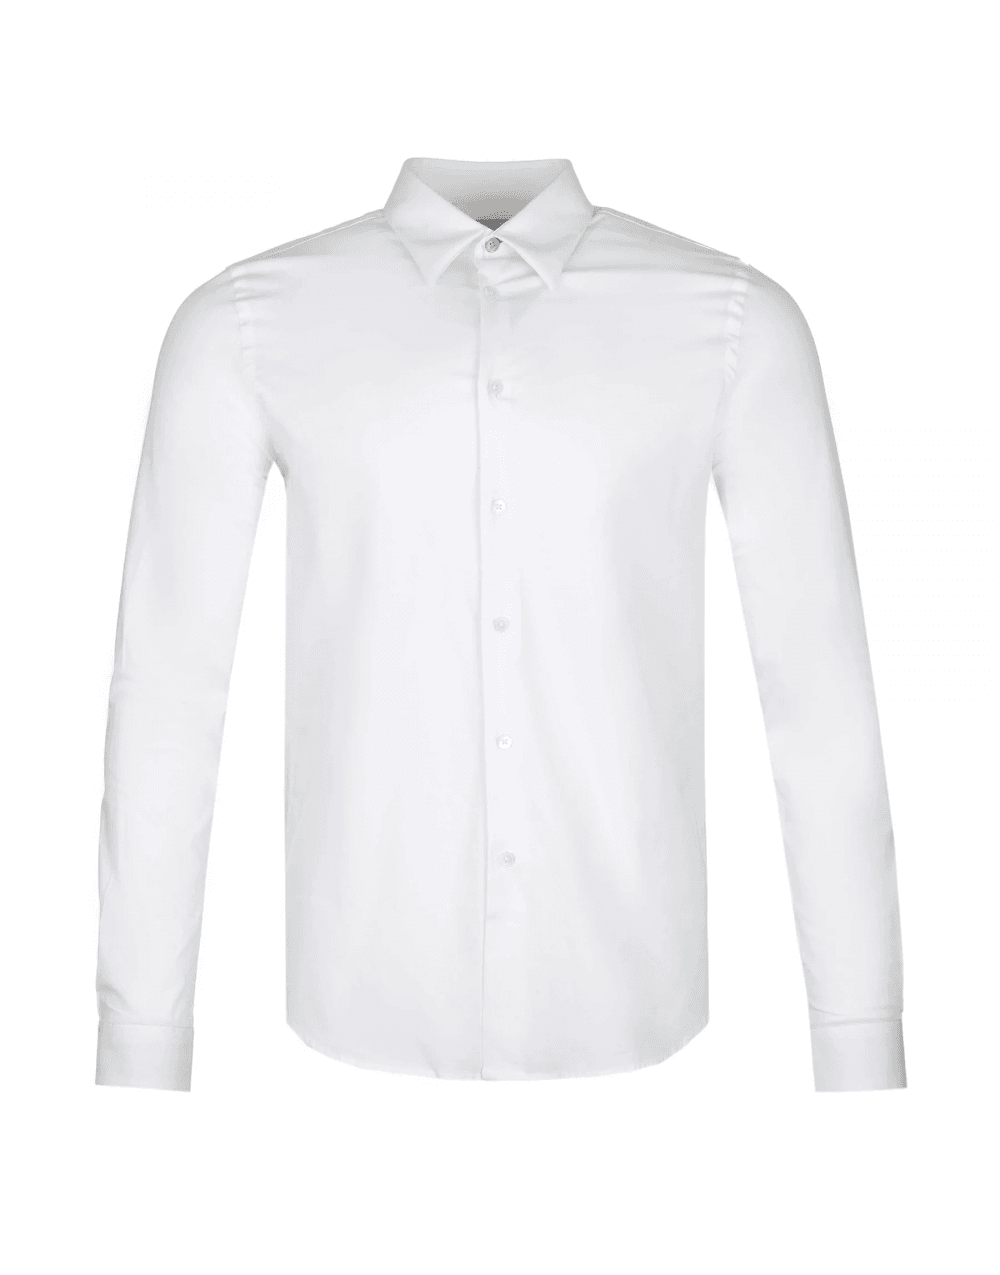 Paul Smith White Tailored Fit Long Sleeves Shirt 